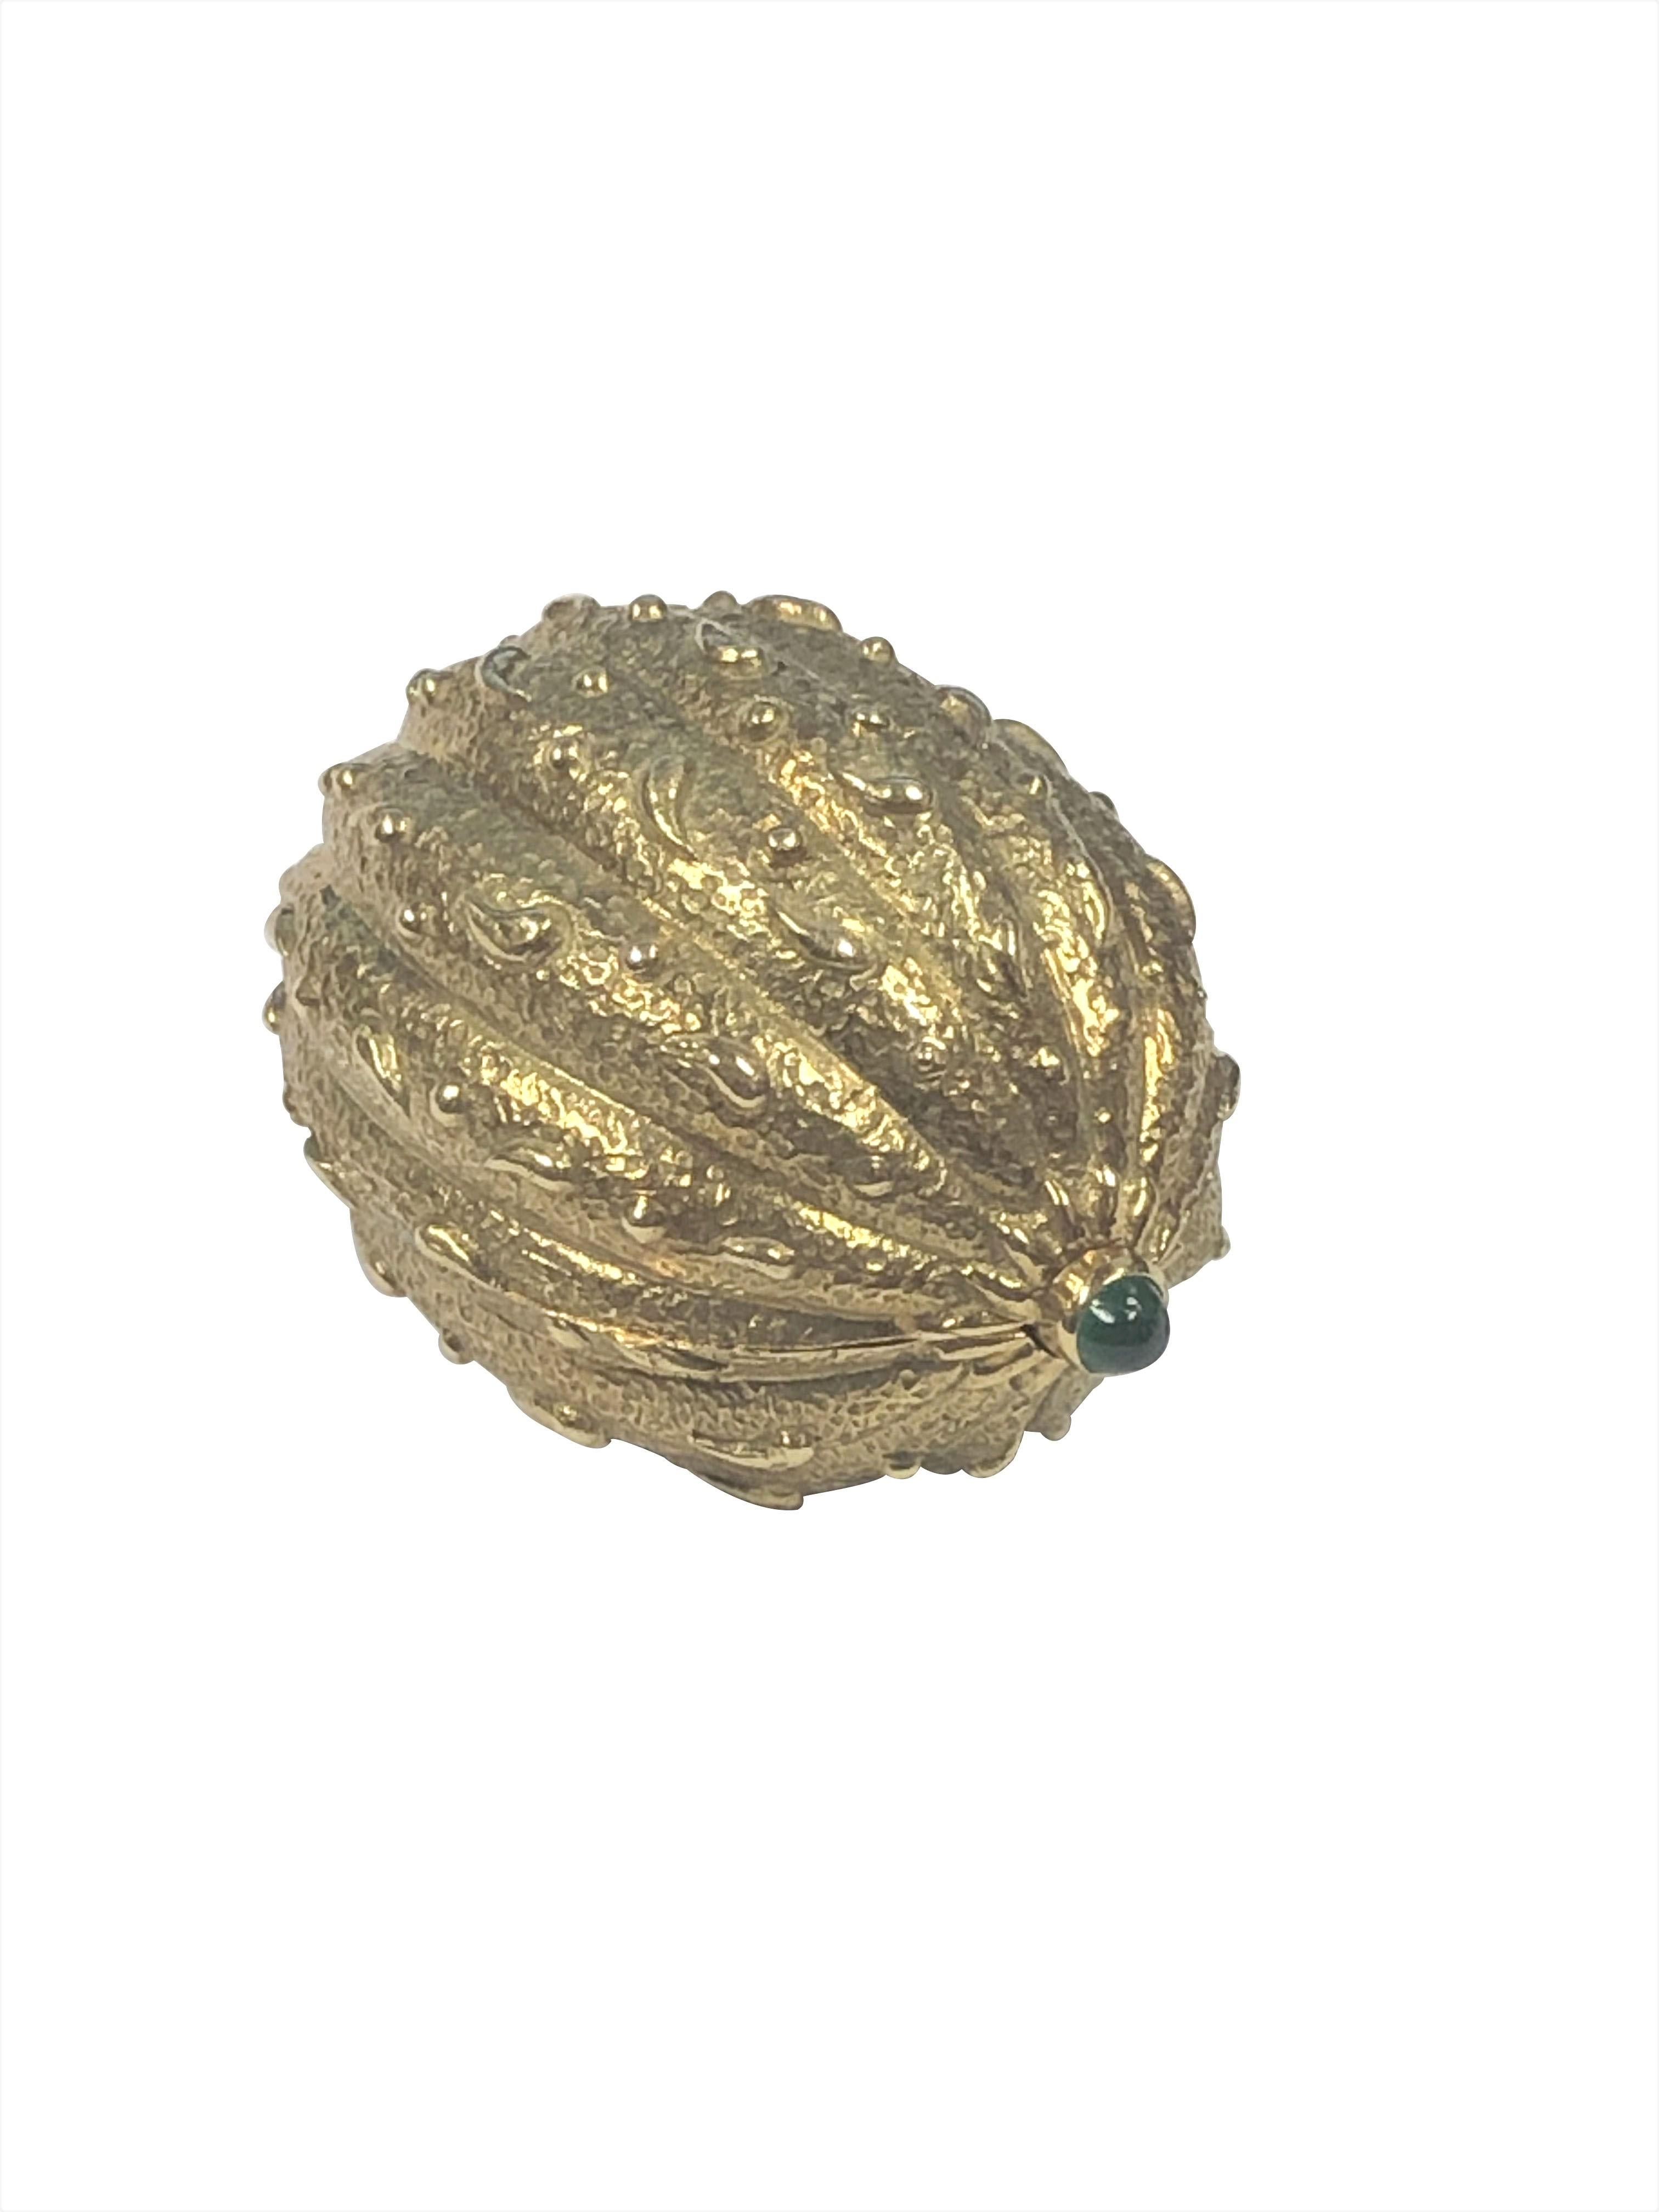 Circa 1970 Jean Schlumberger for Tiffany & Company 18k Yellow Gold Walnut Form Pill Box, measuring 1 3/8 X 7/8 X 5/8 inch and weighing 23.5 Grams, fine detailing and textured with a Cabochon Emerald set at each end. Comes in original Tiffany box. 